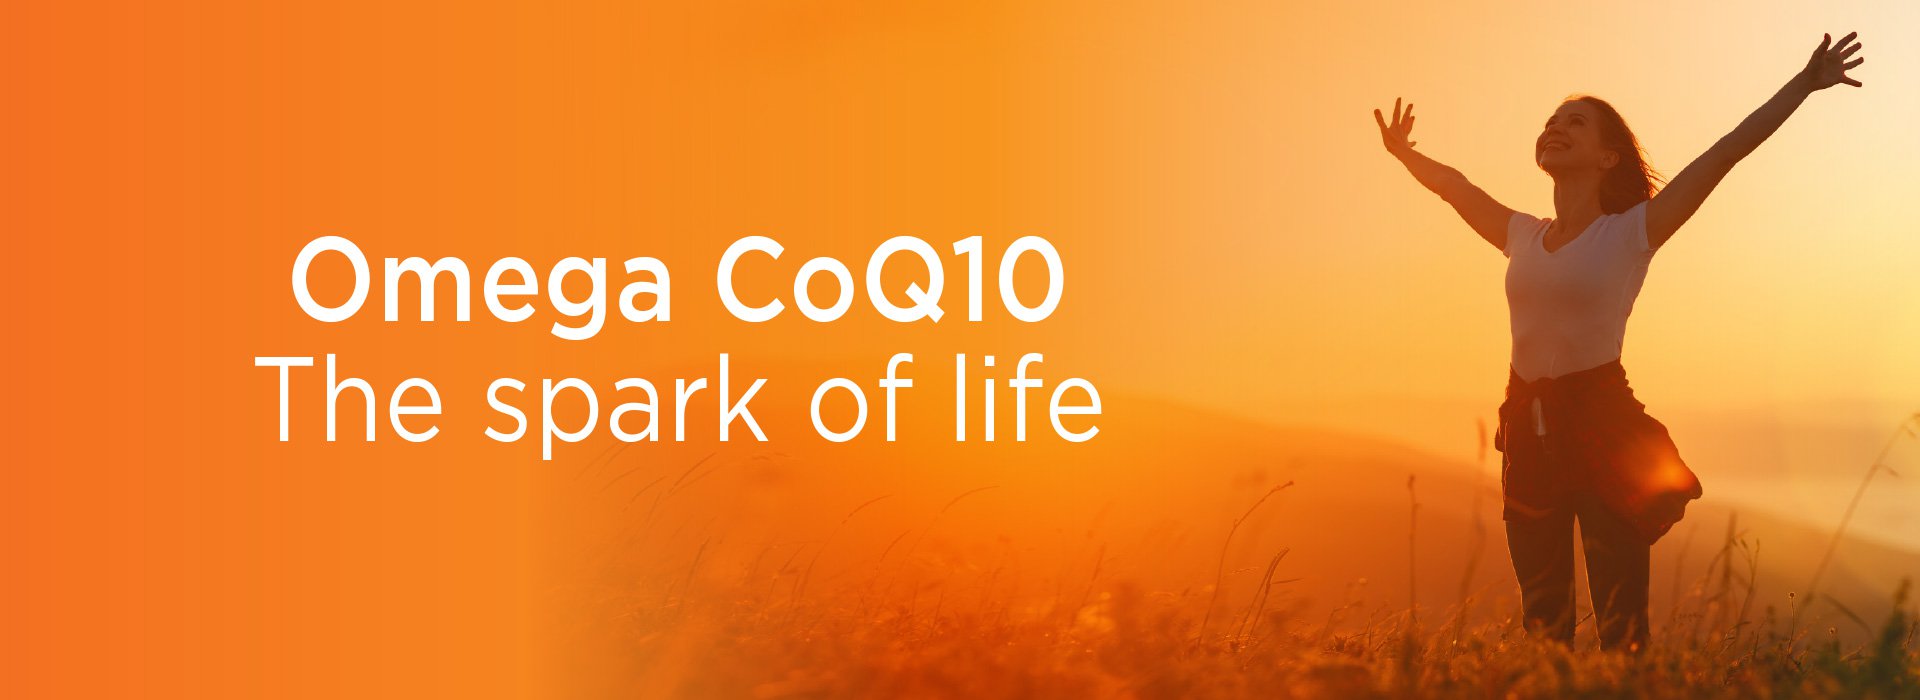 New Image International: Omega CoQ10 The spark of life